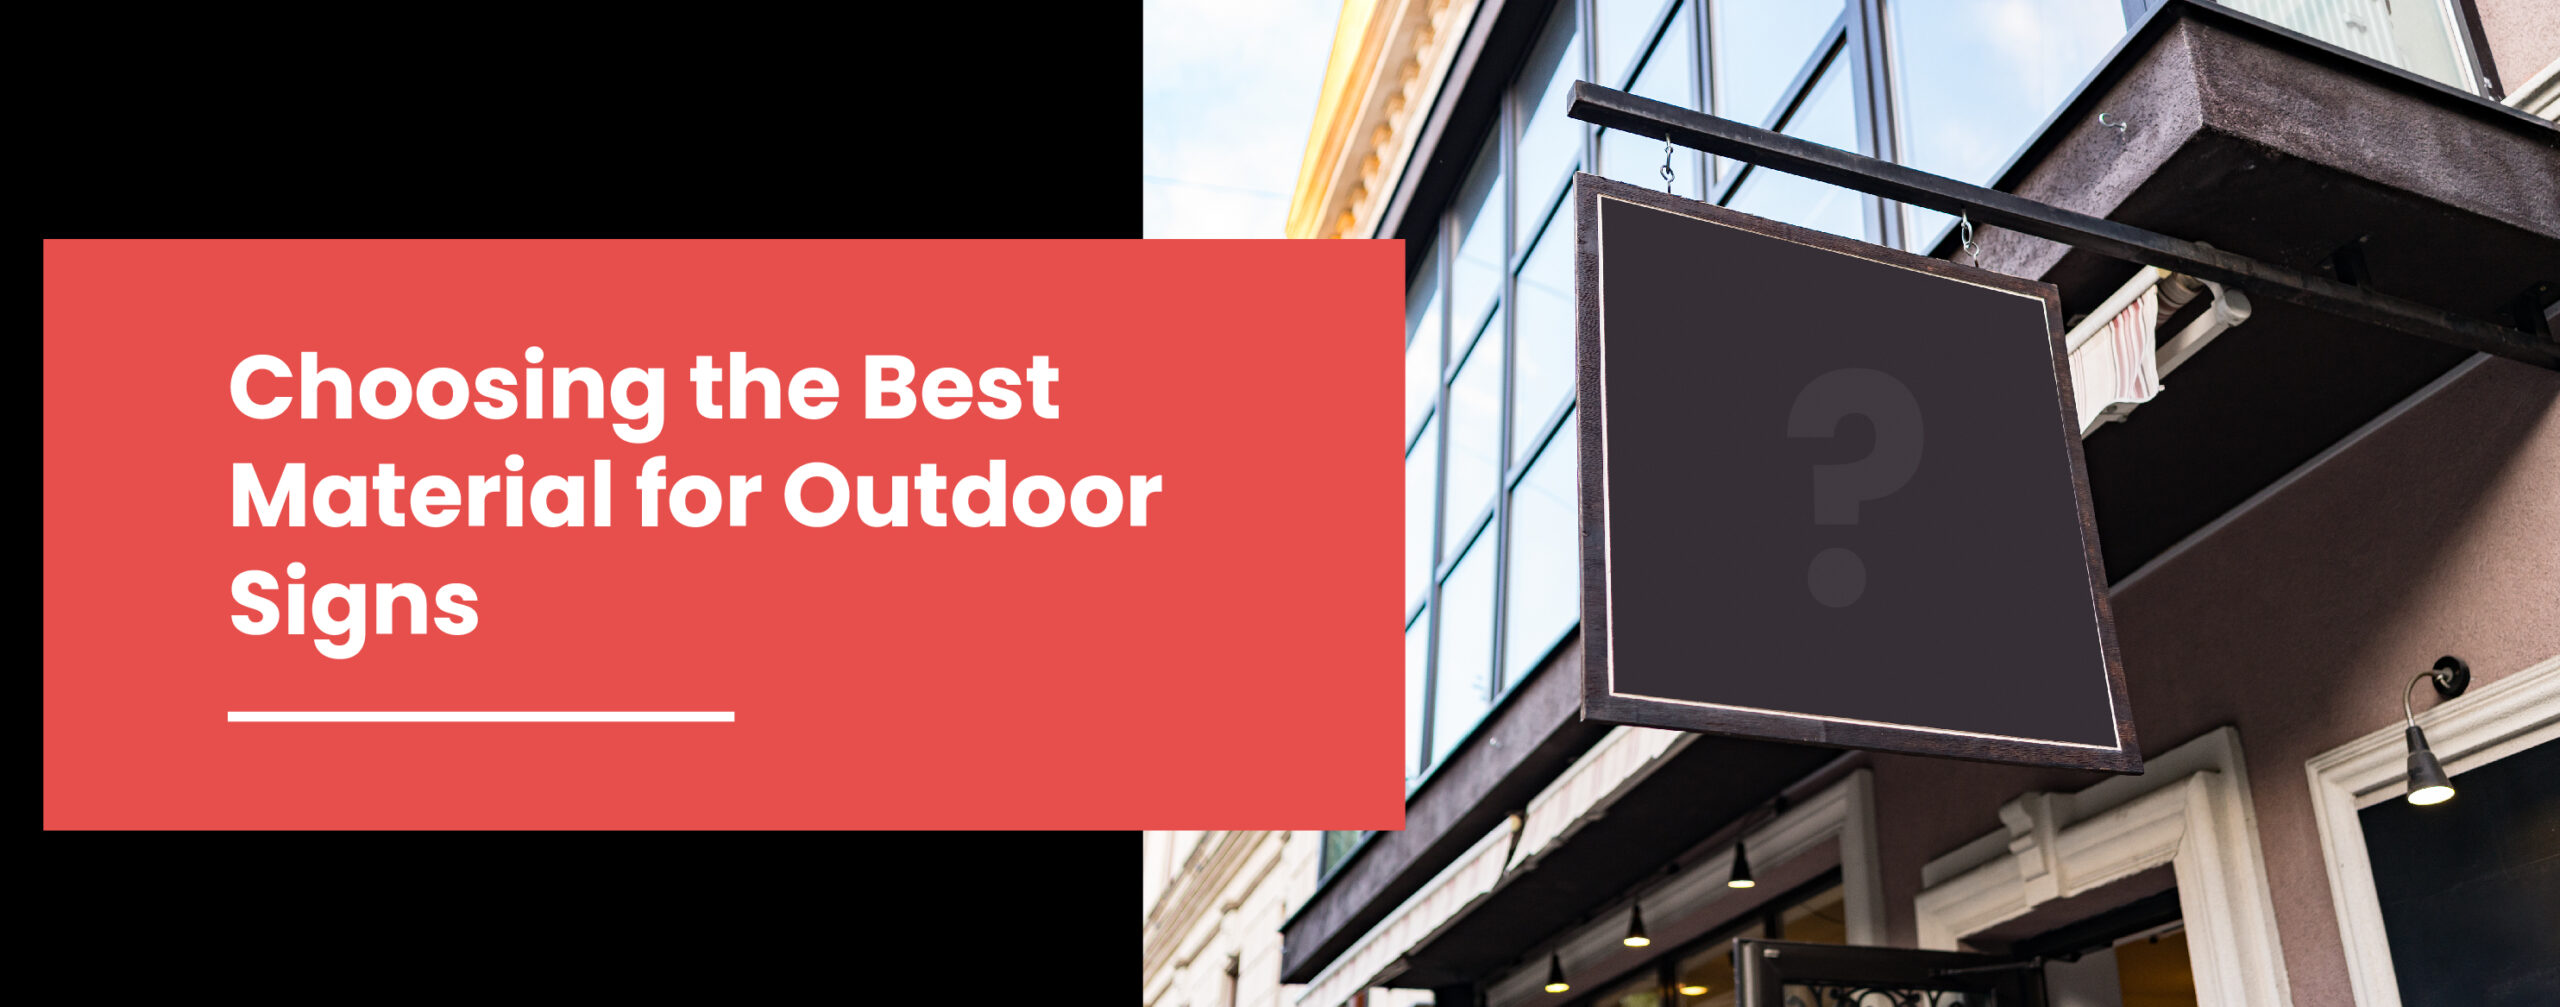 Choosing the Best Material for Outdoor Signs